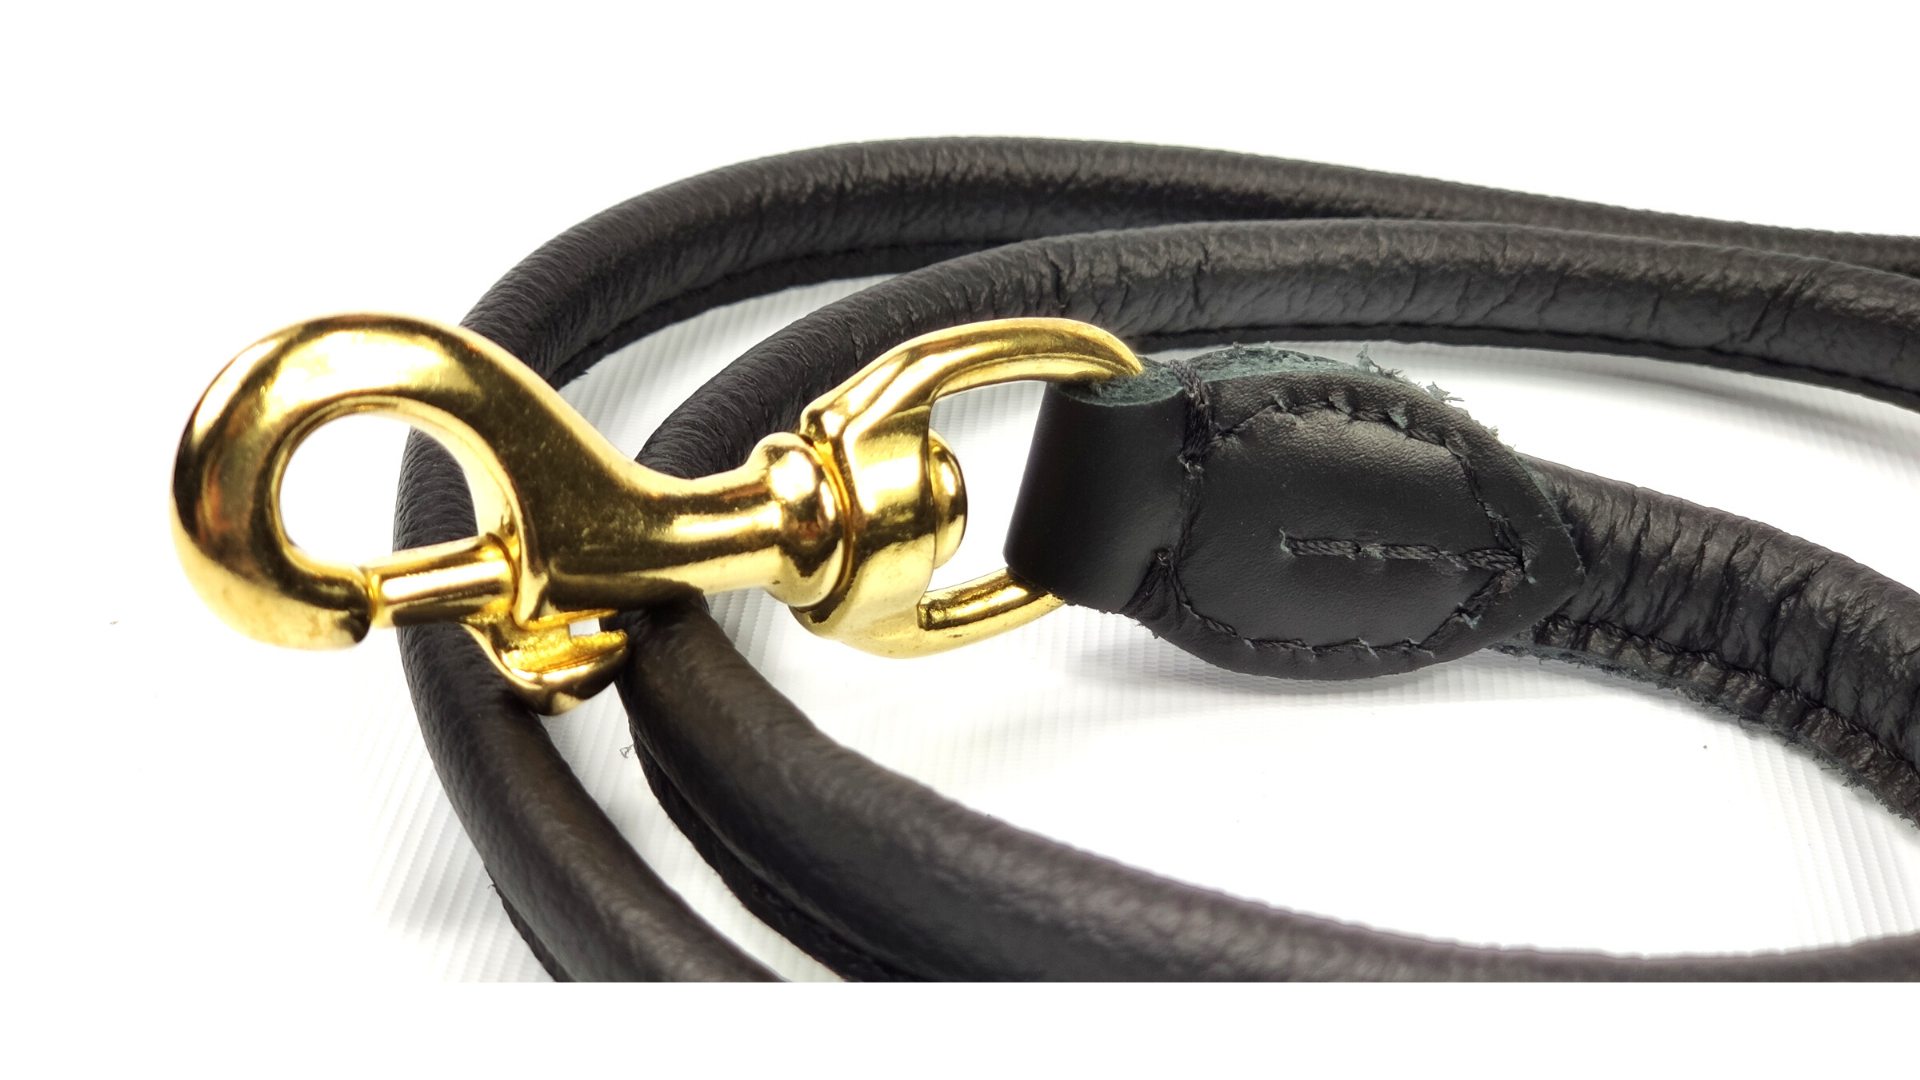 Hillfoot Rolled Leather Dog Leash - Black